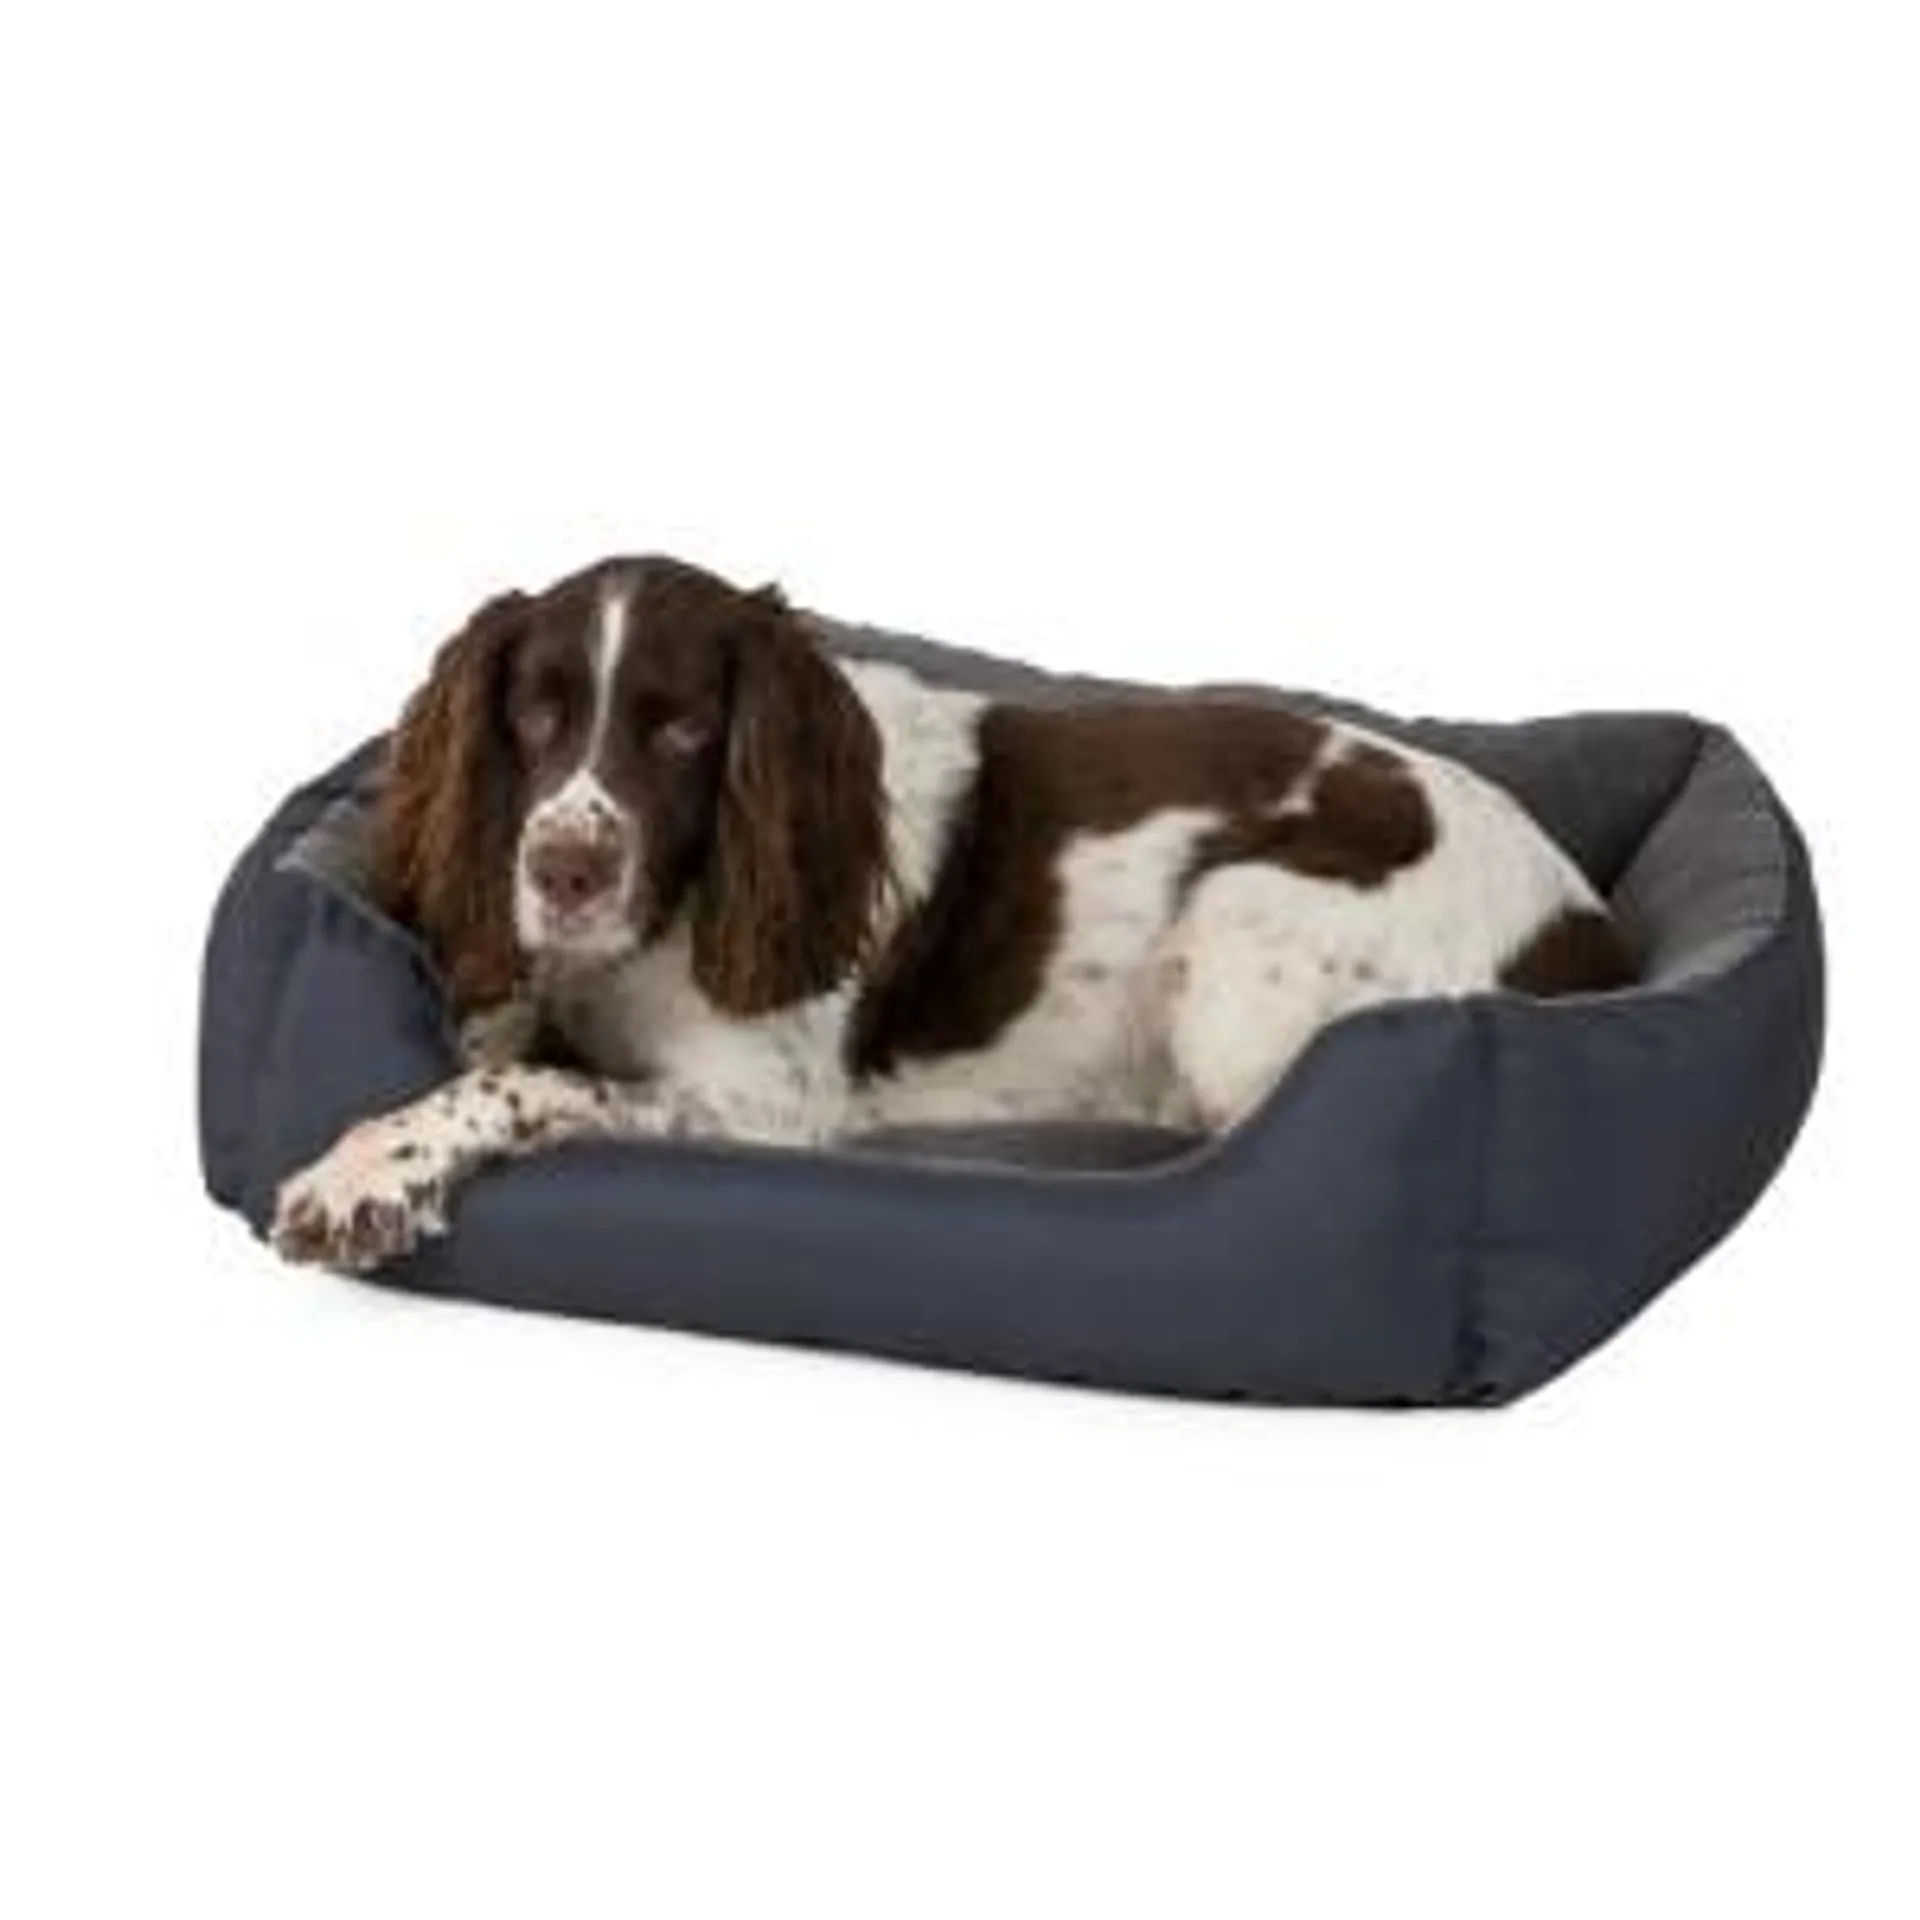 Pets at Home Fleece Square Dog Bed Charcoal Large